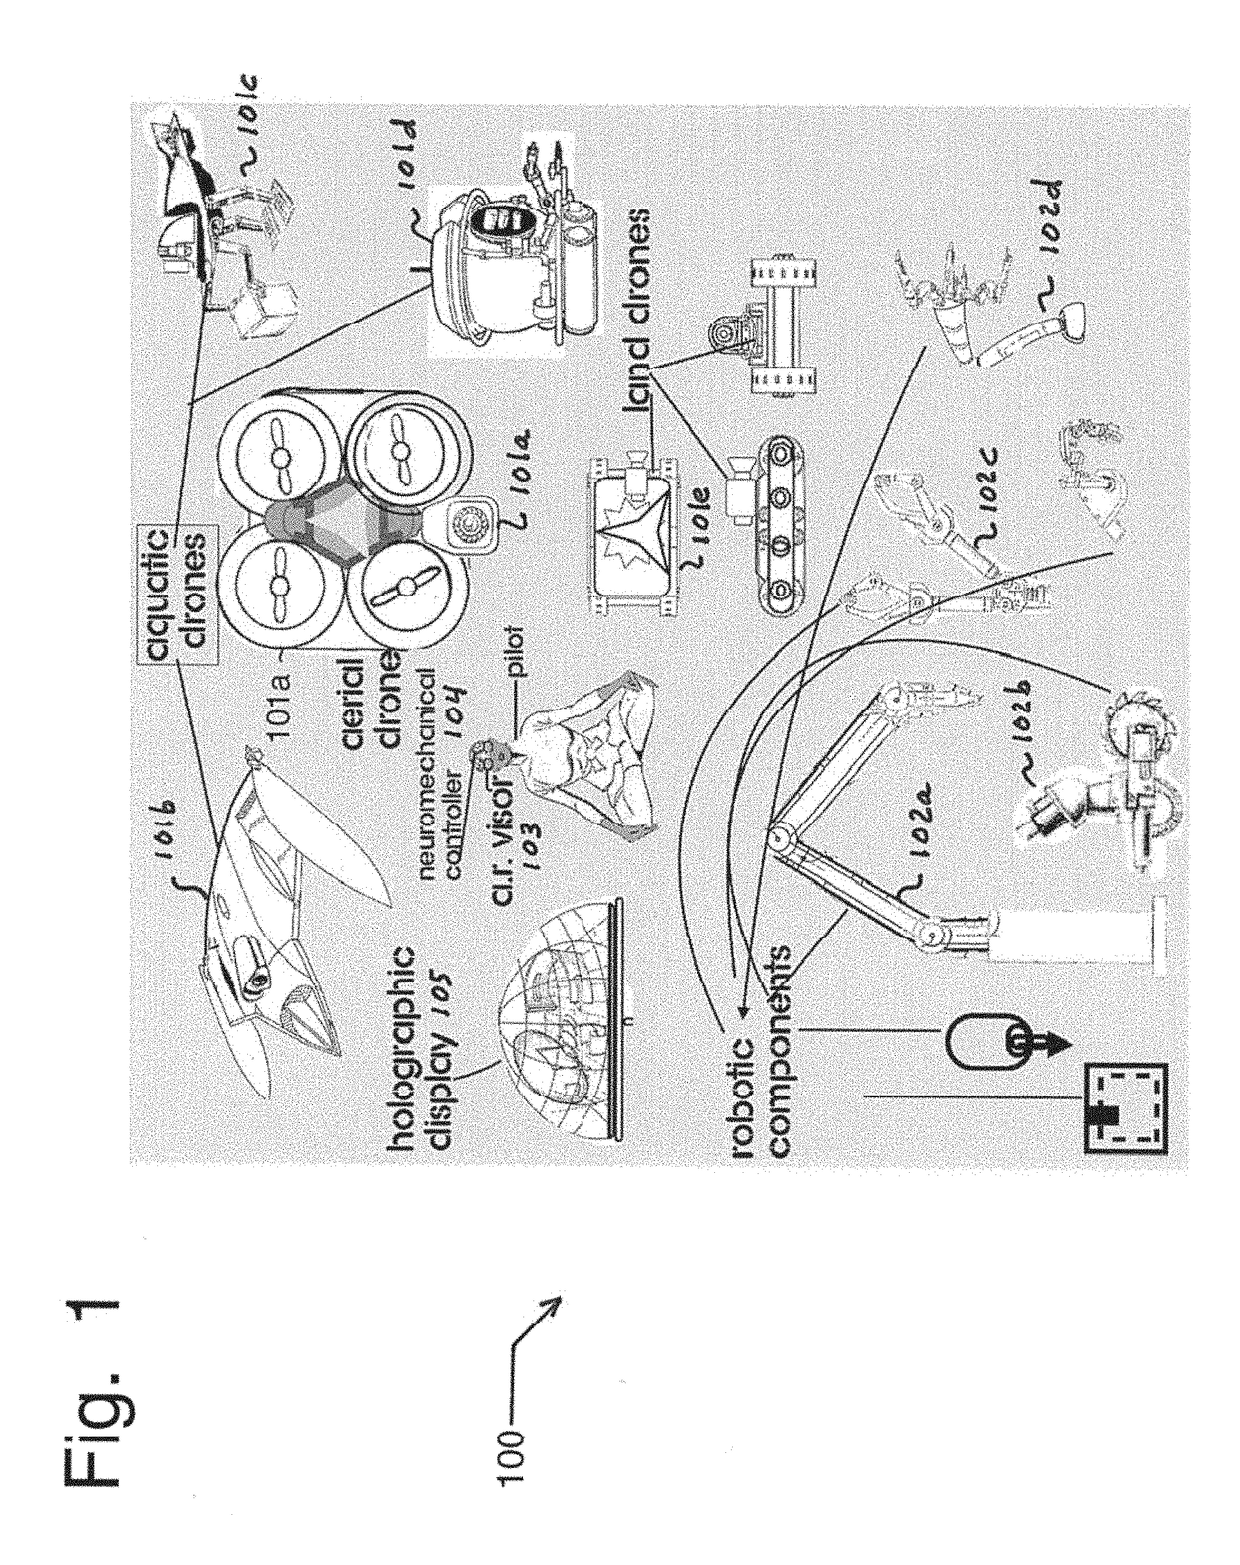 Predictive probable cause system and unmanned vehicles using the same